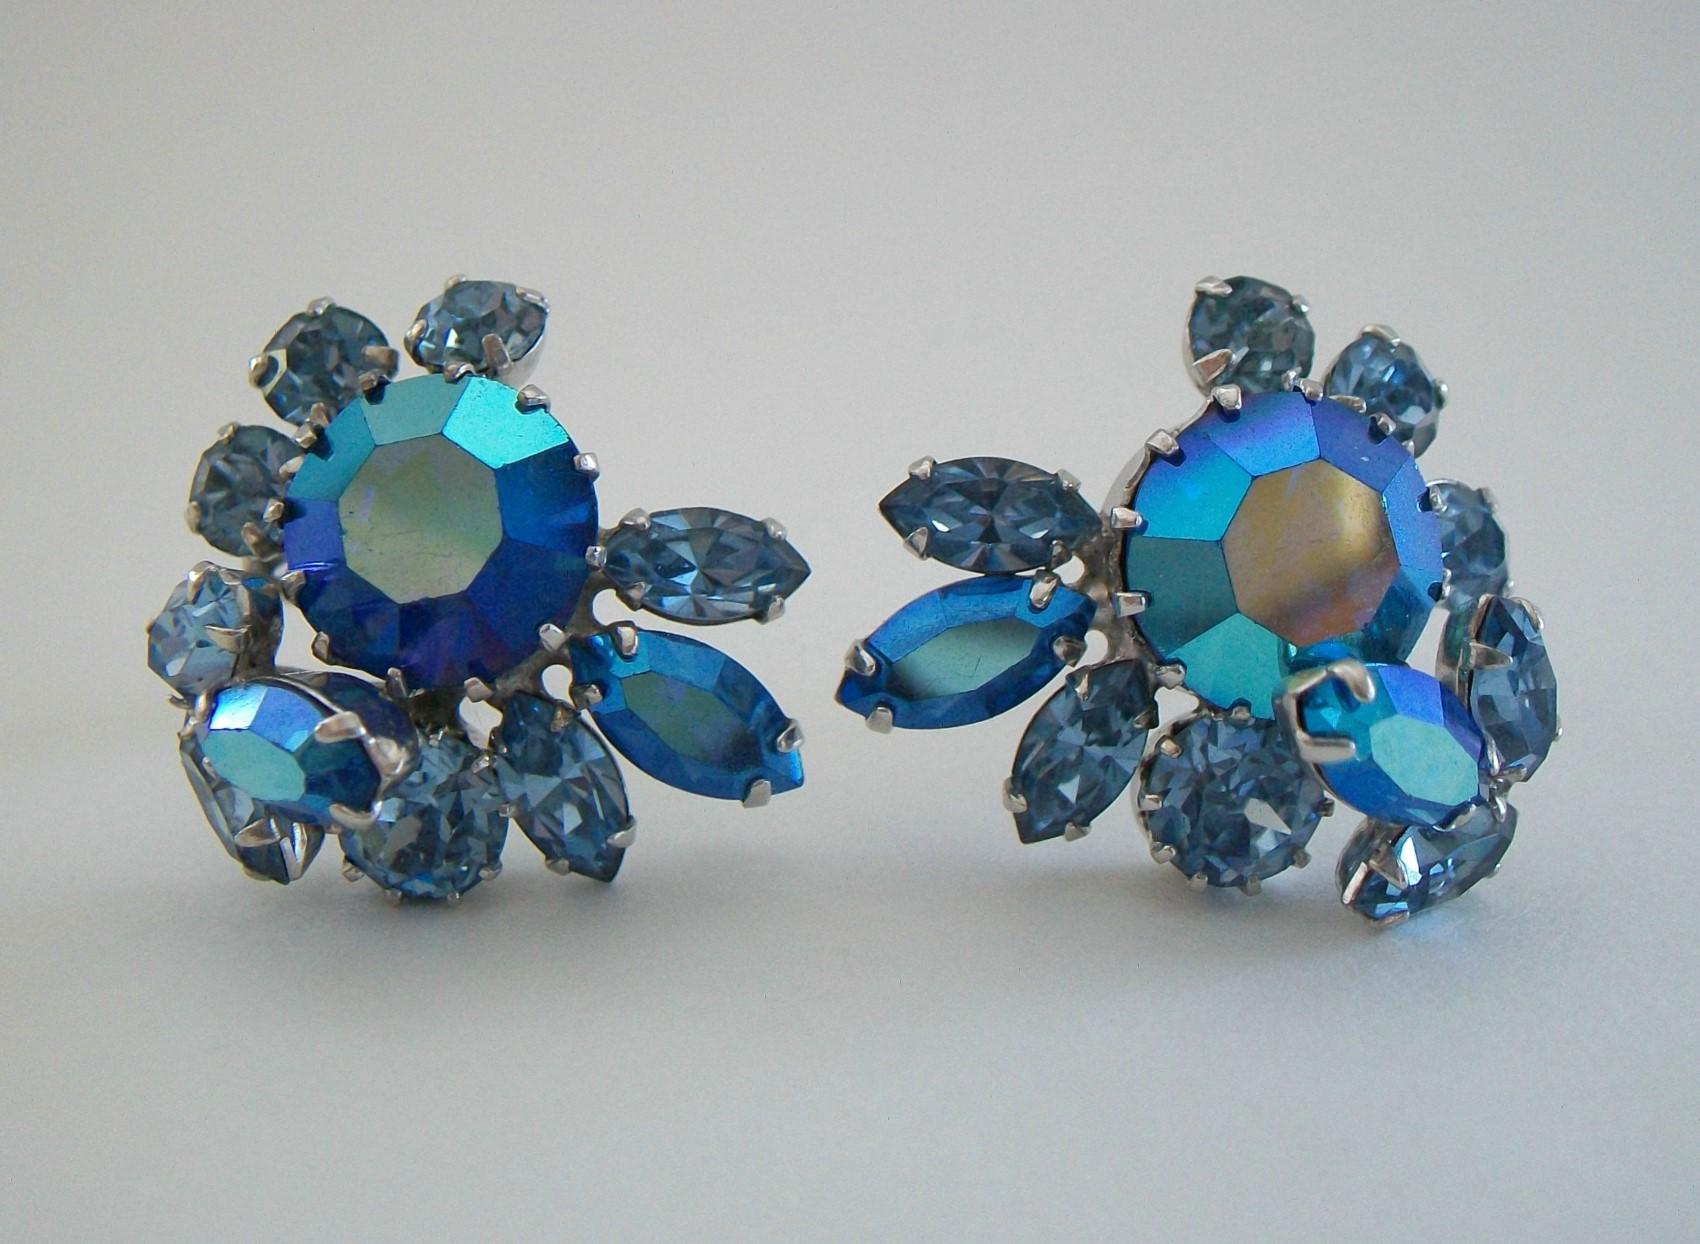 SHERMAN - Vintage pair of Aurora Borealis and blue crystal ear clips - featuring a large round faceted crystal to the center of each earring, surrounded by smaller marquis and round shapes, all prong set - signed on the back of each ear clip (see